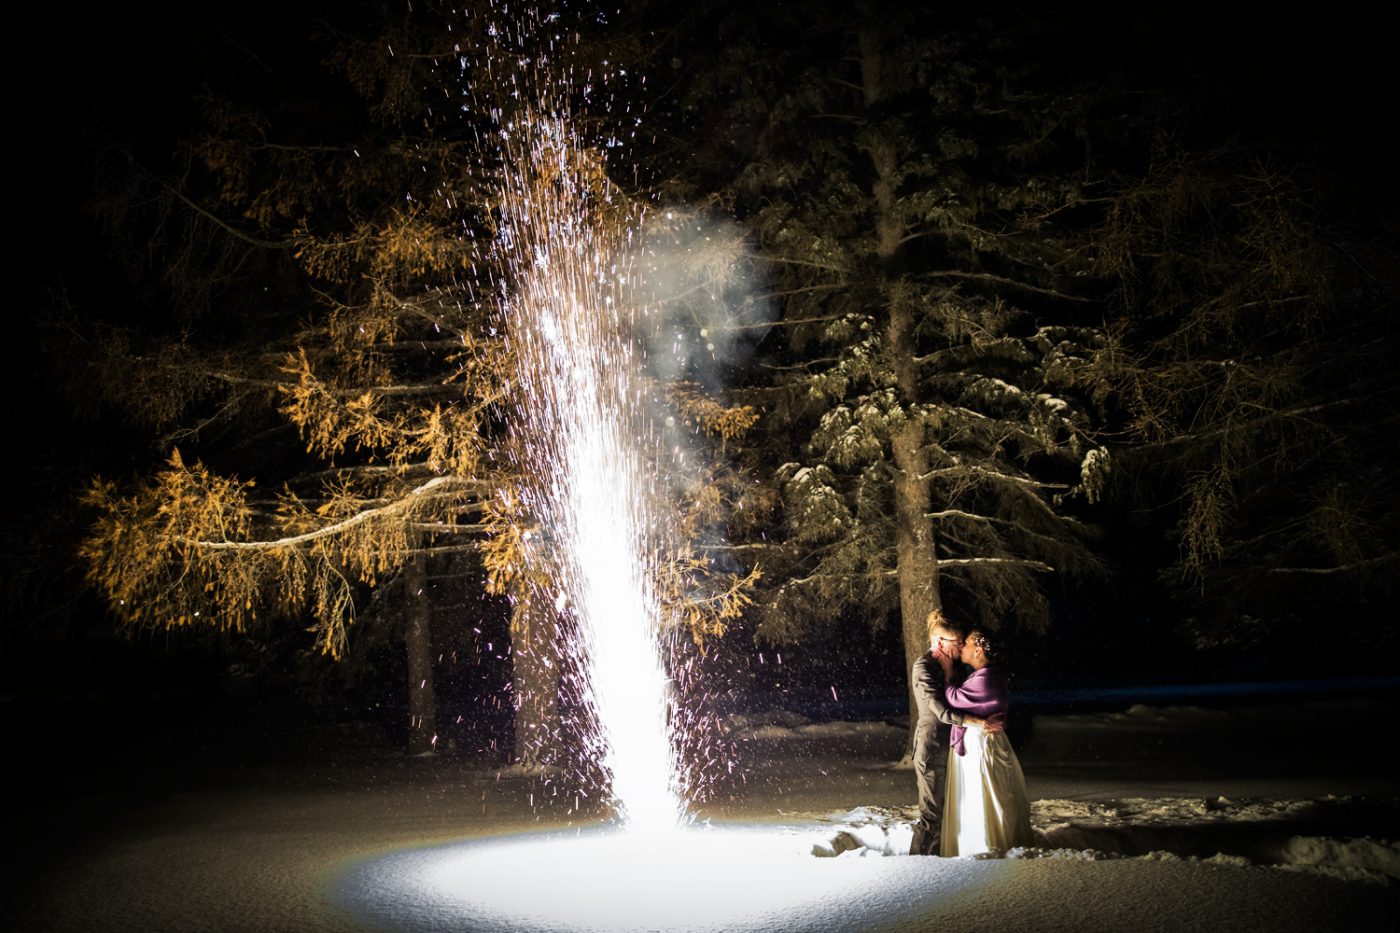 The couple kisses while a few feet away is a 30 foot hight sparkler firework show